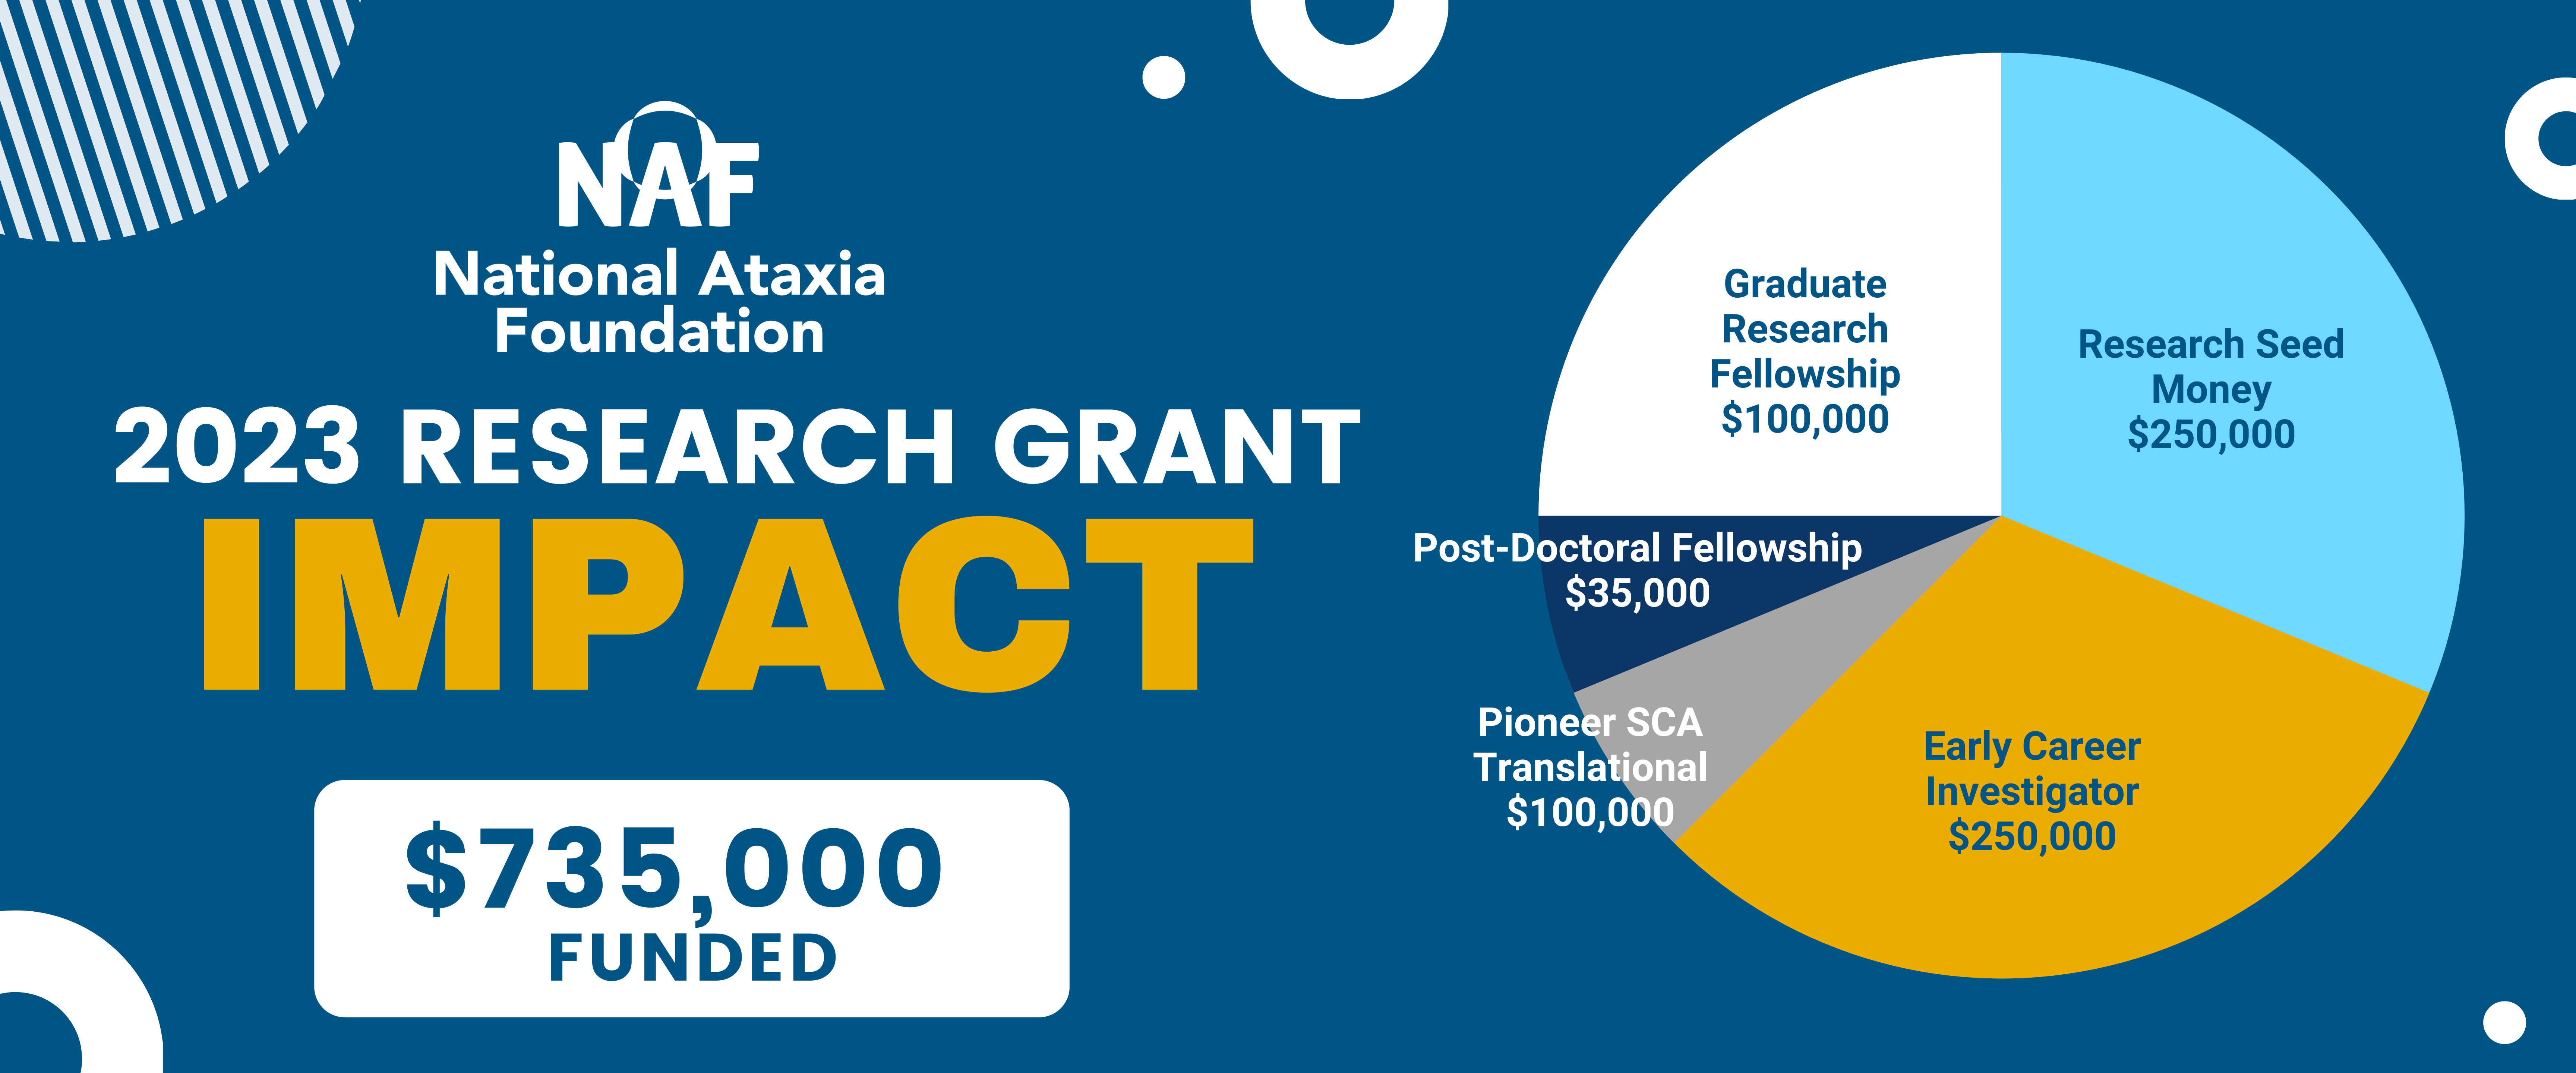 Graphic with a pie chart to show the amount spent for research funding, which is a total of $735,000